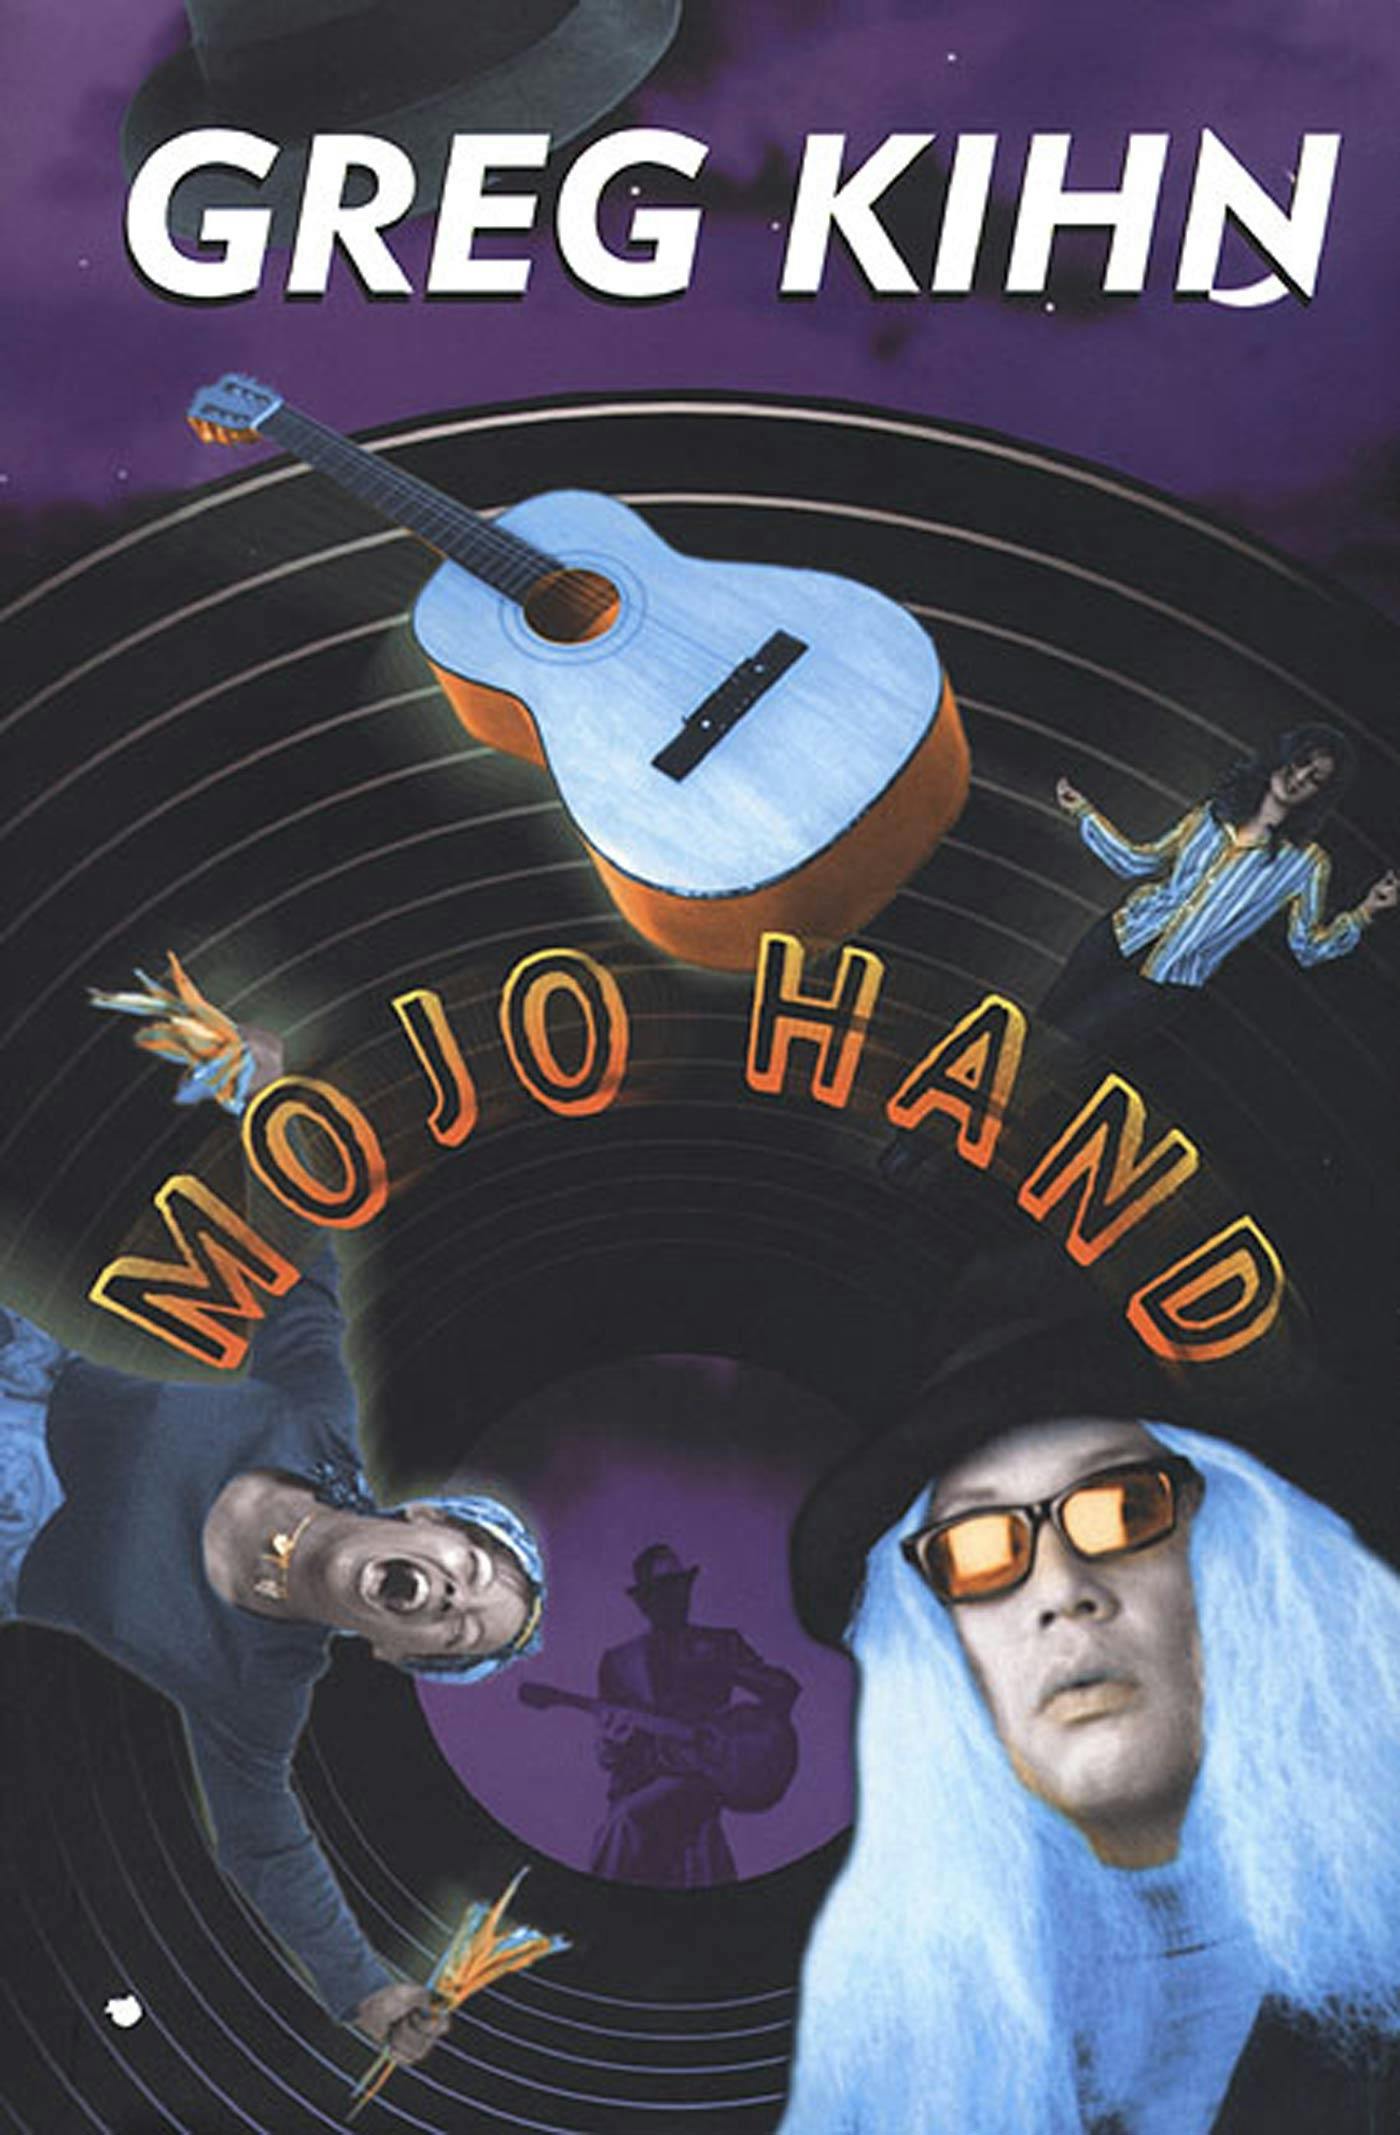 Cover for the book titled as: Mojo Hand